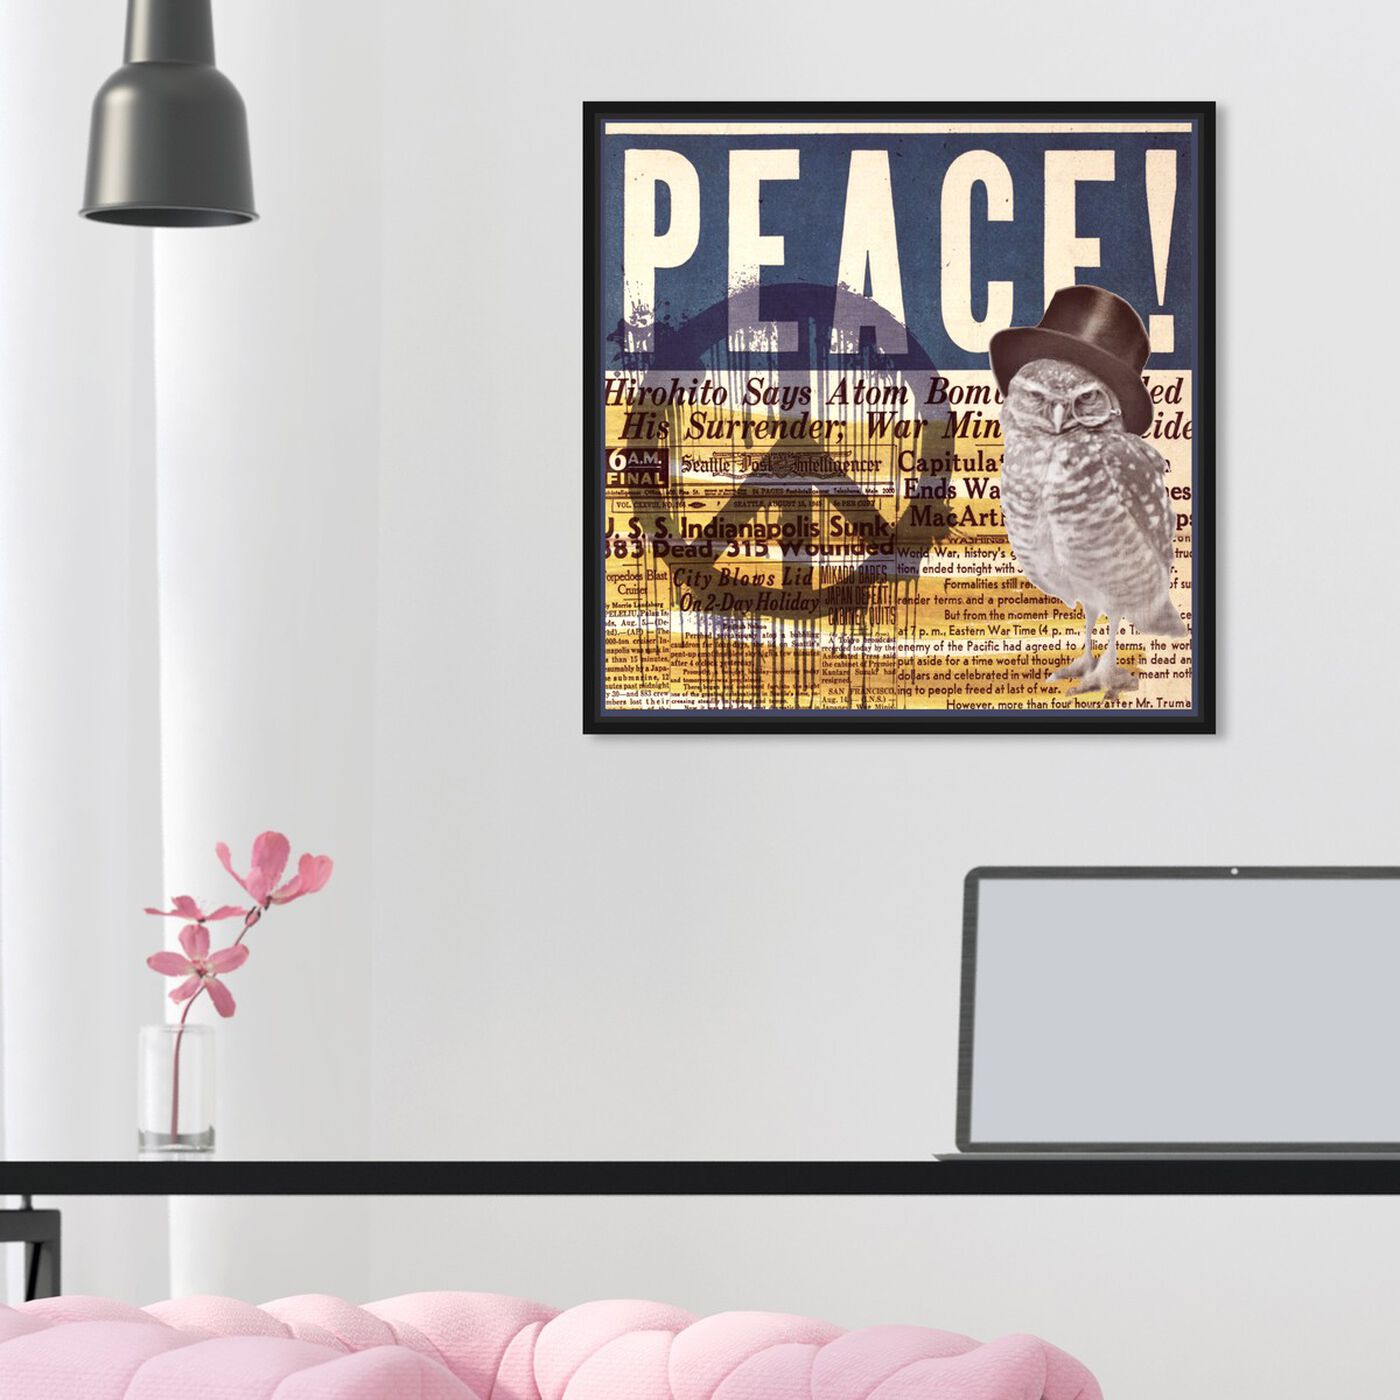 Hanging view of Peace! featuring advertising and posters art.